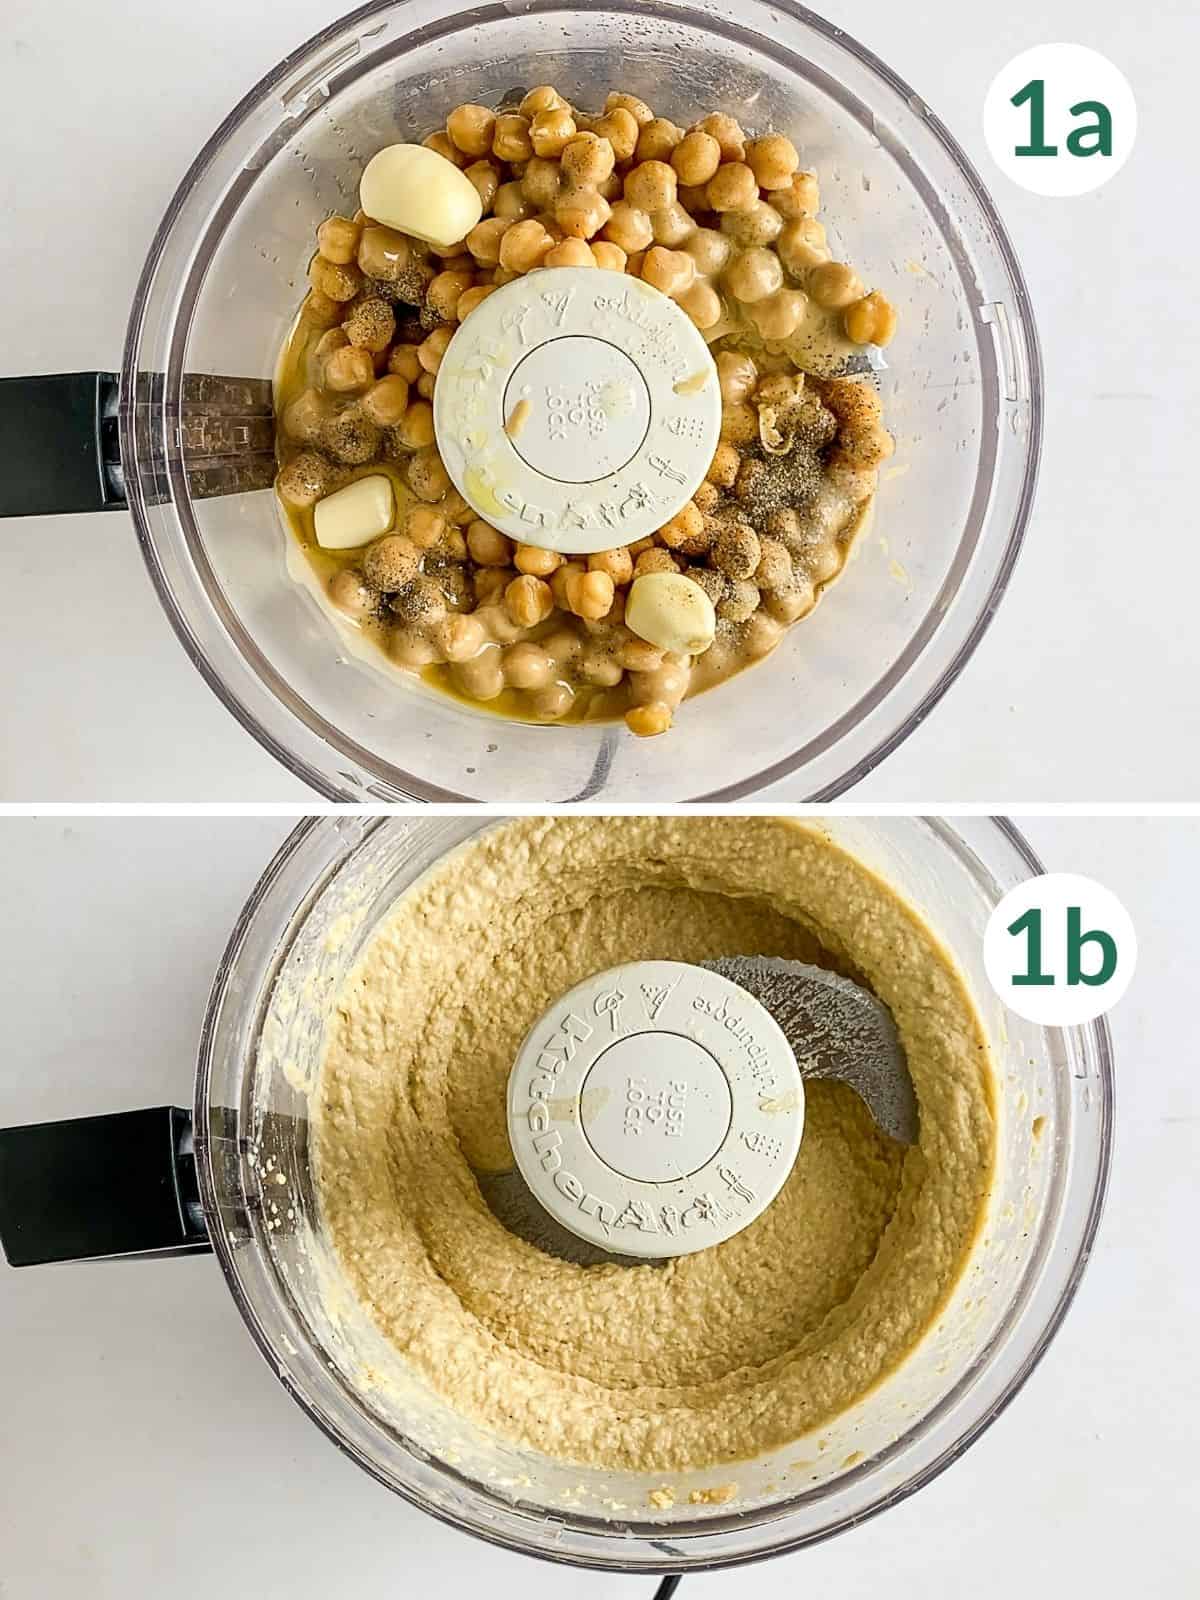 How to make canned chickpea hummus by placing all ingredients in a blender and blending until smooth and creamy.